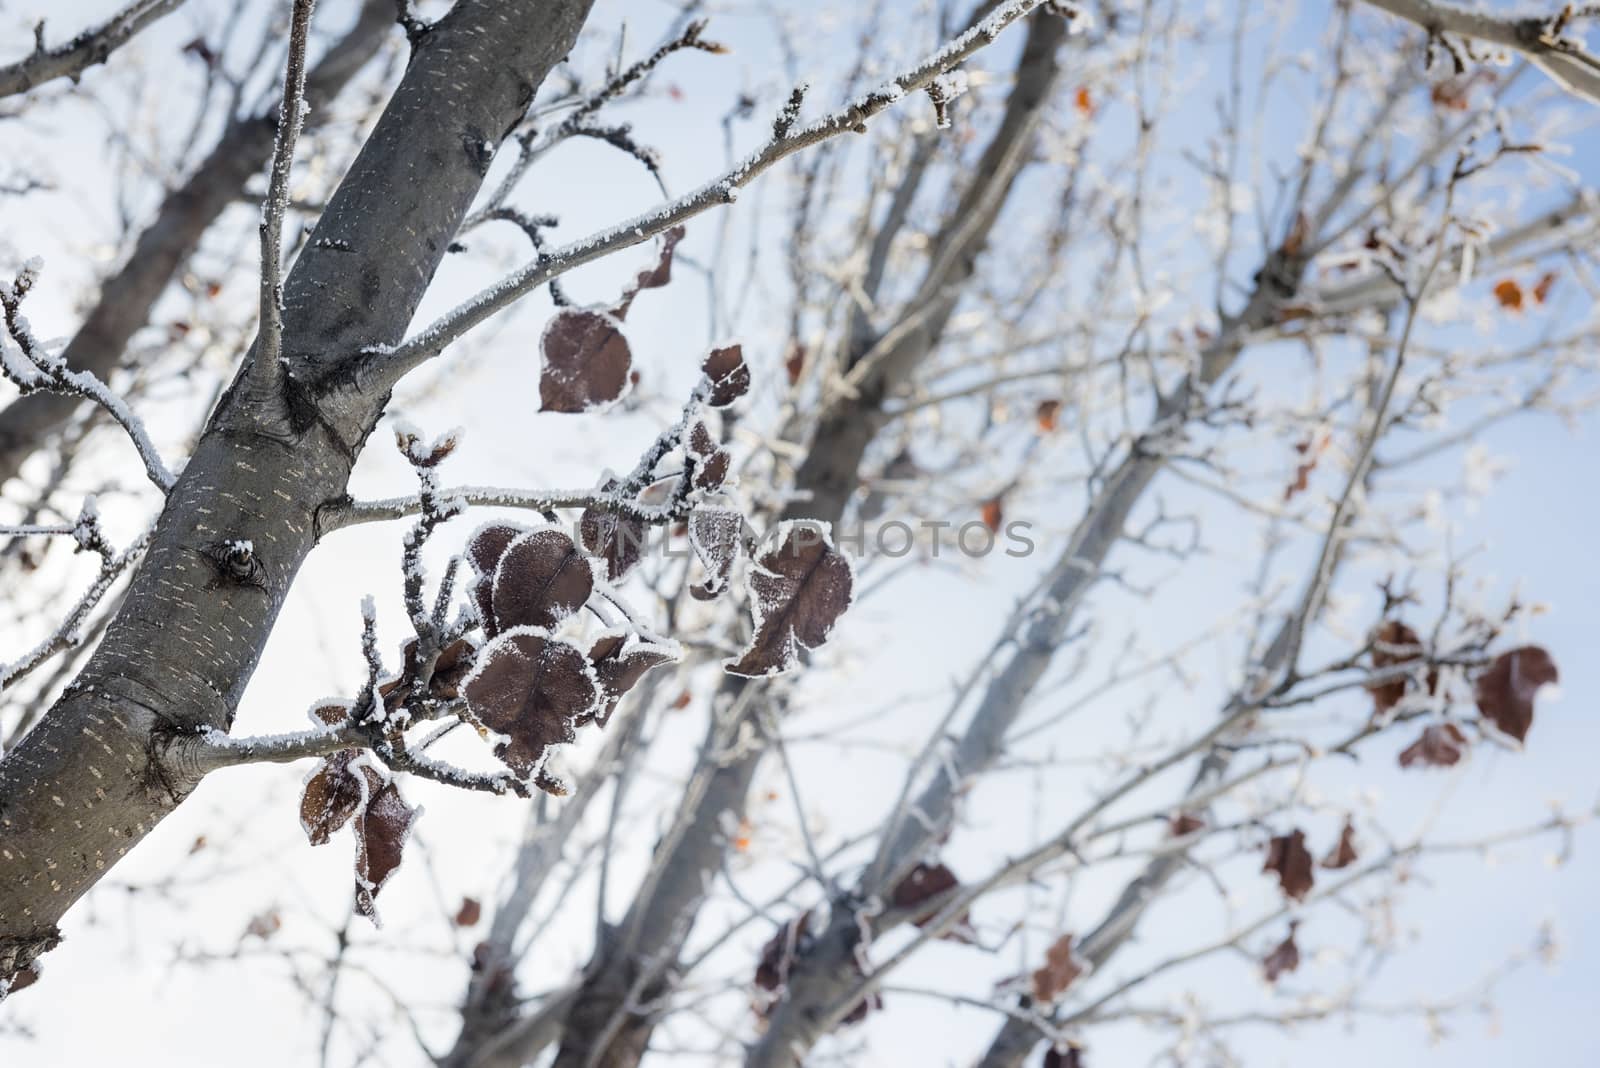 Frost-covered tree branches and leaves in winter by Njean